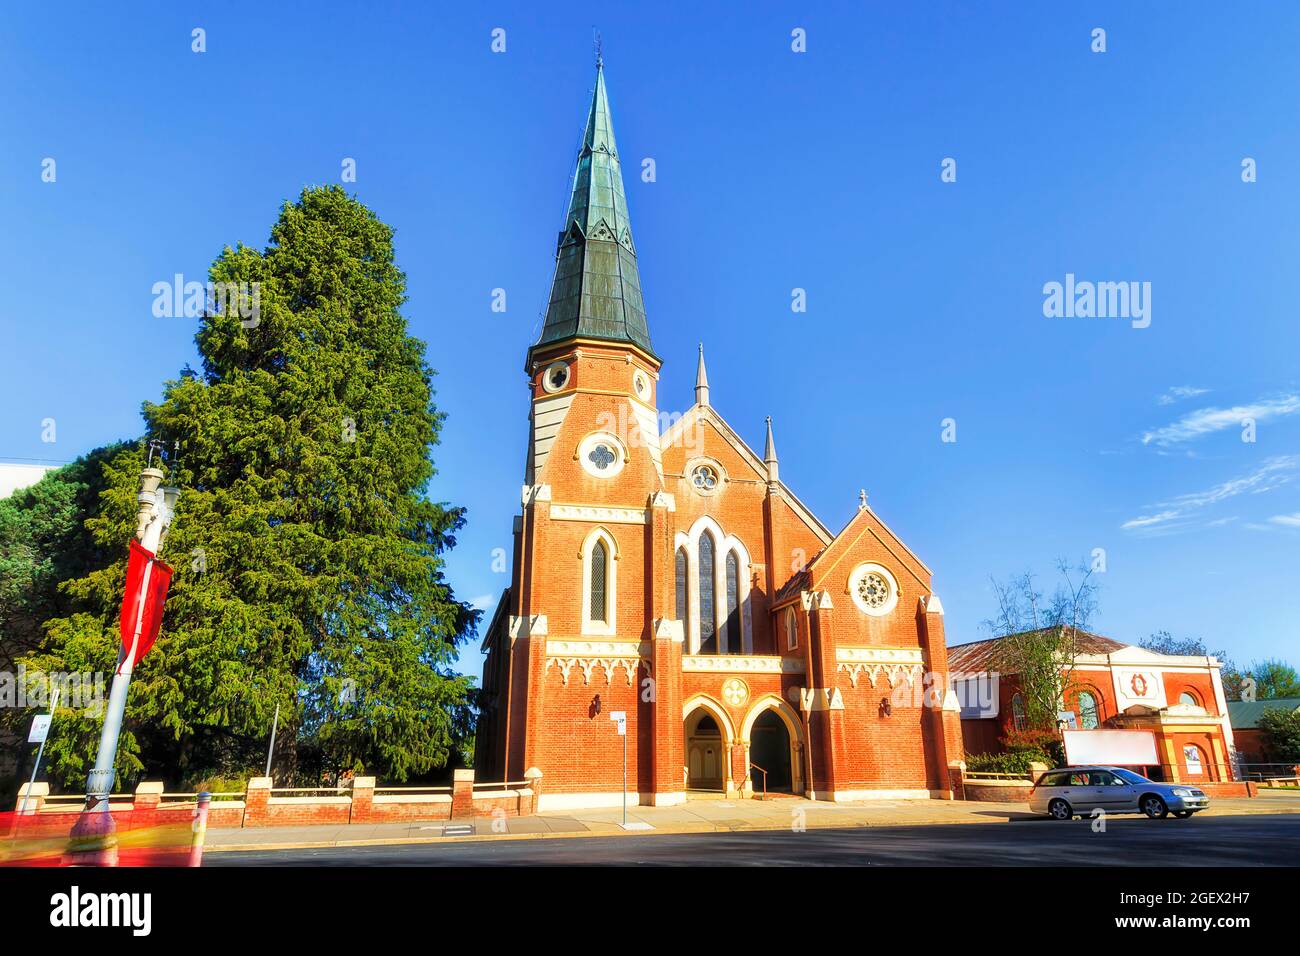 Local street in Bathurst town with historic red brick uniting church building under blue sky. Stock Photo